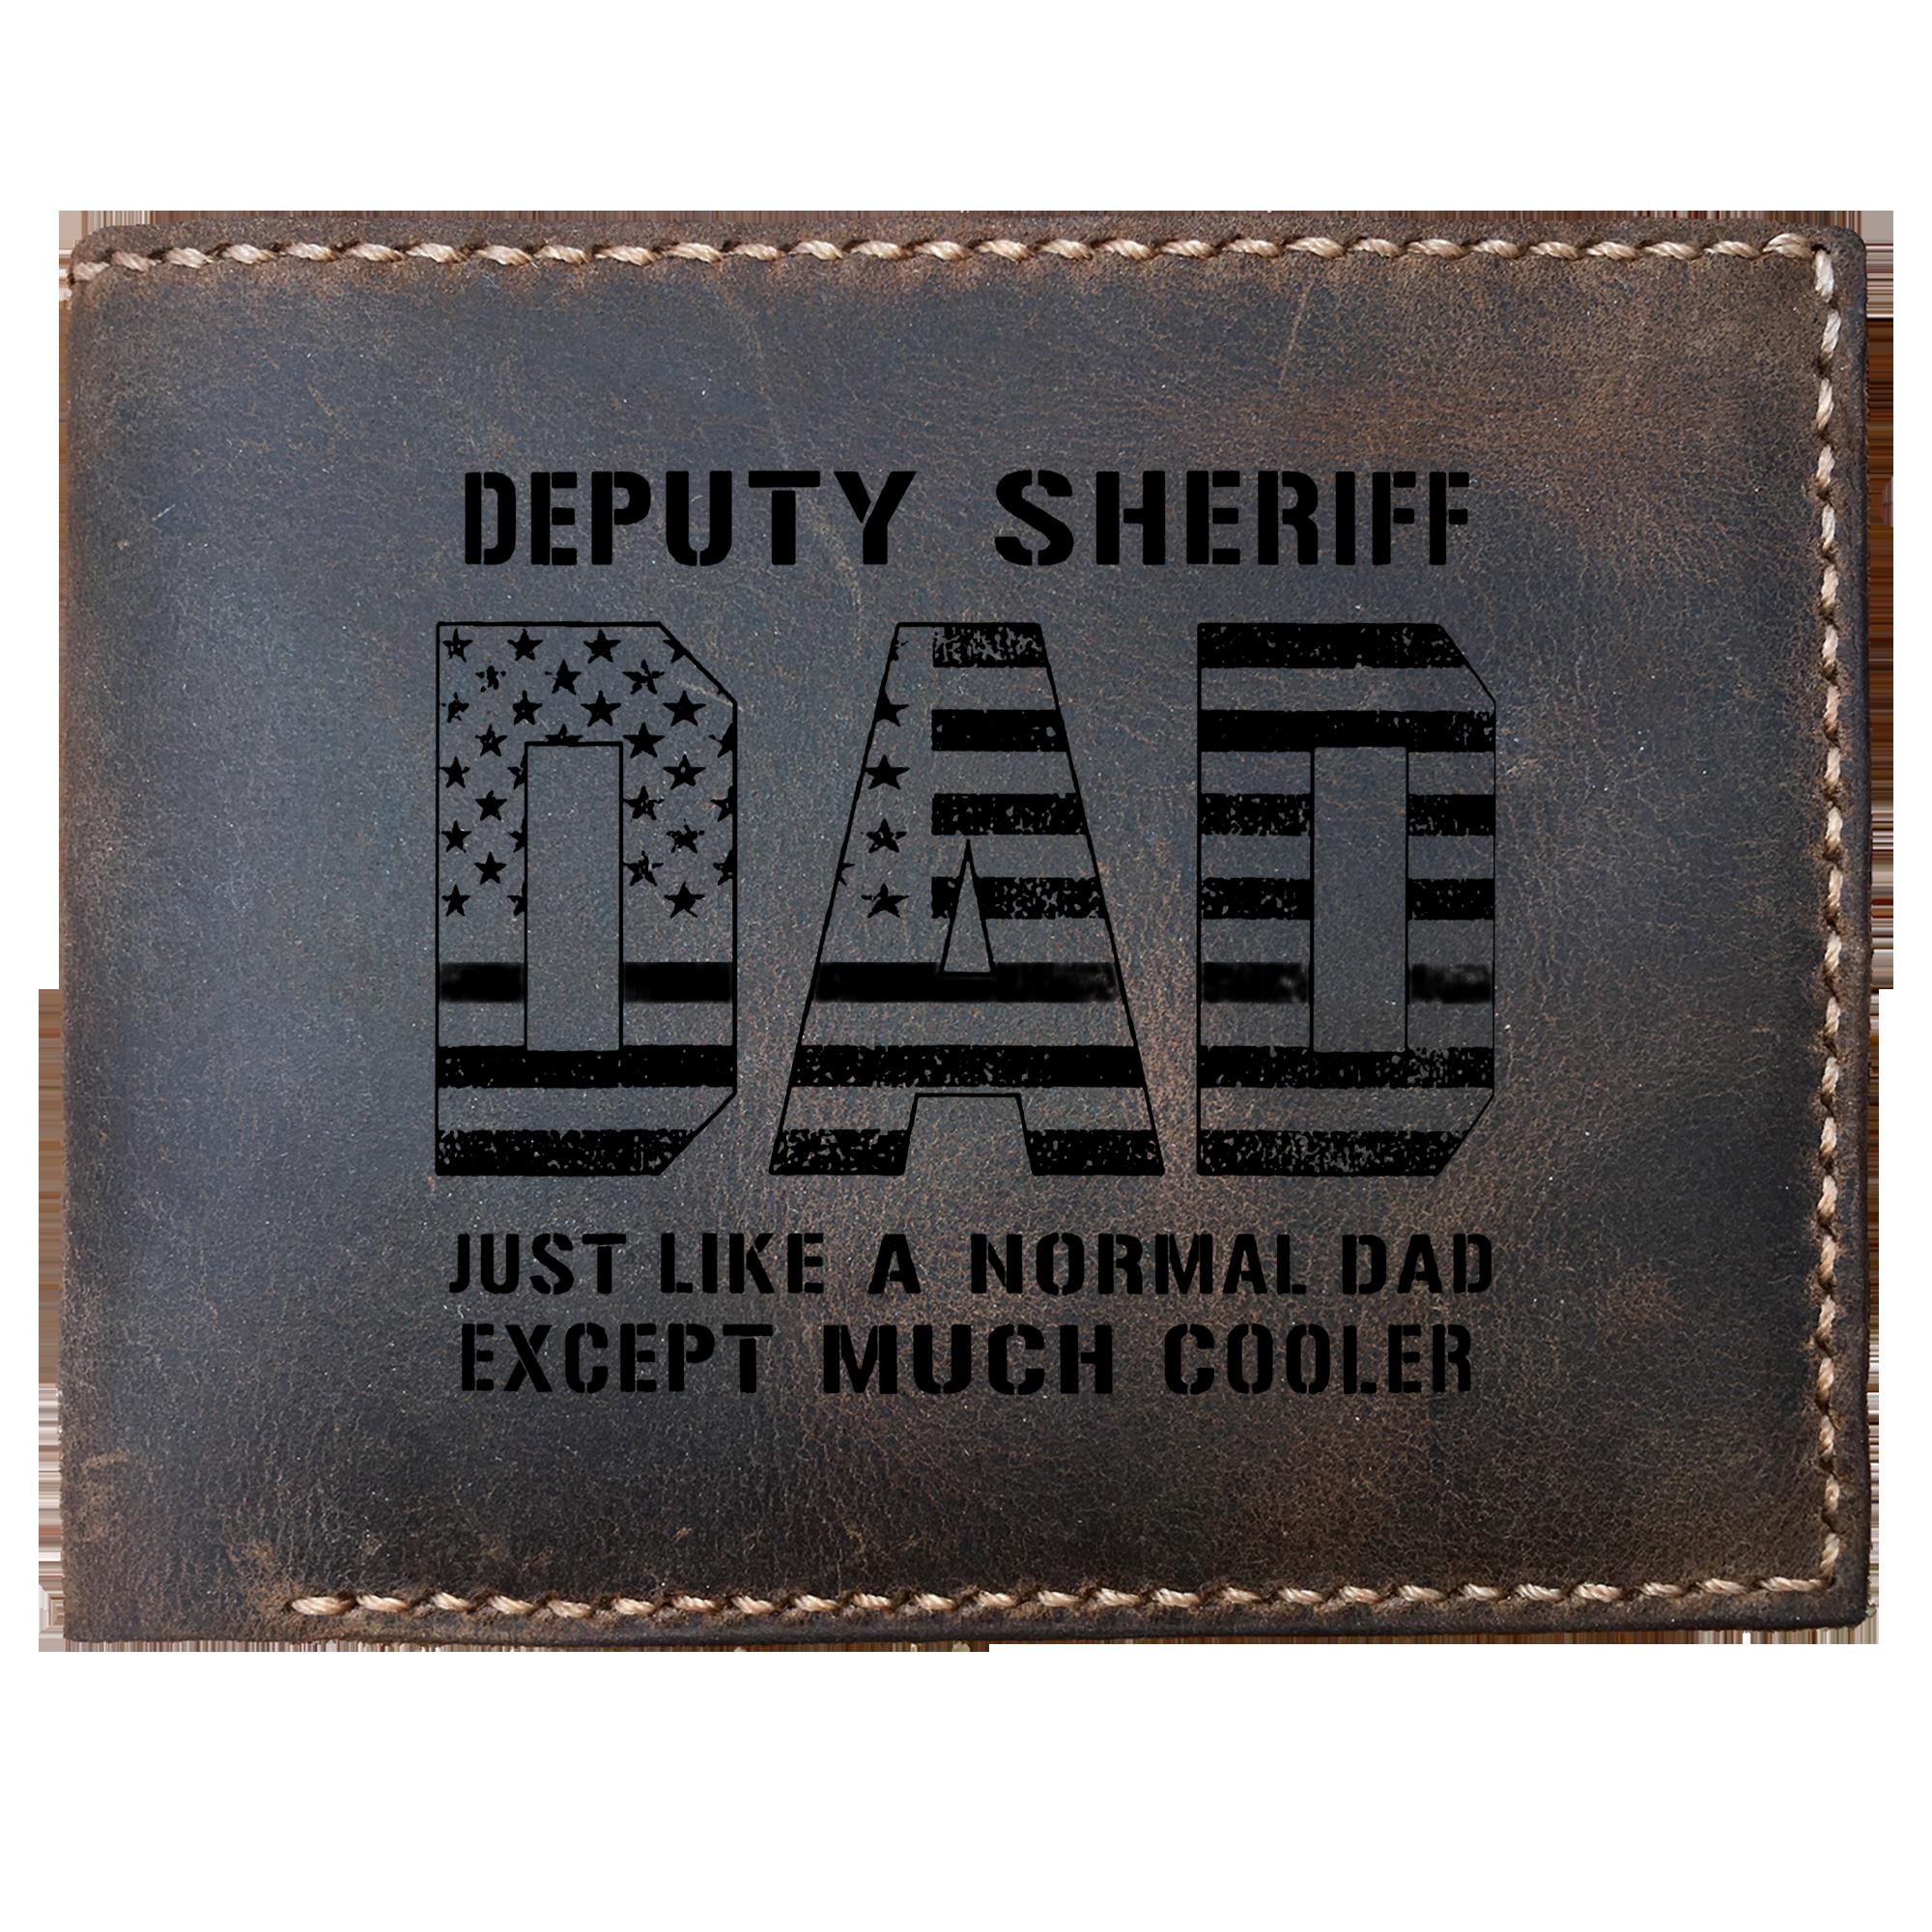 Skitongifts Funny Custom Laser Engraved Bifold Leather Wallet For Men, Deputy Sheriff Dad Is Serve Protect Thin Blue Line